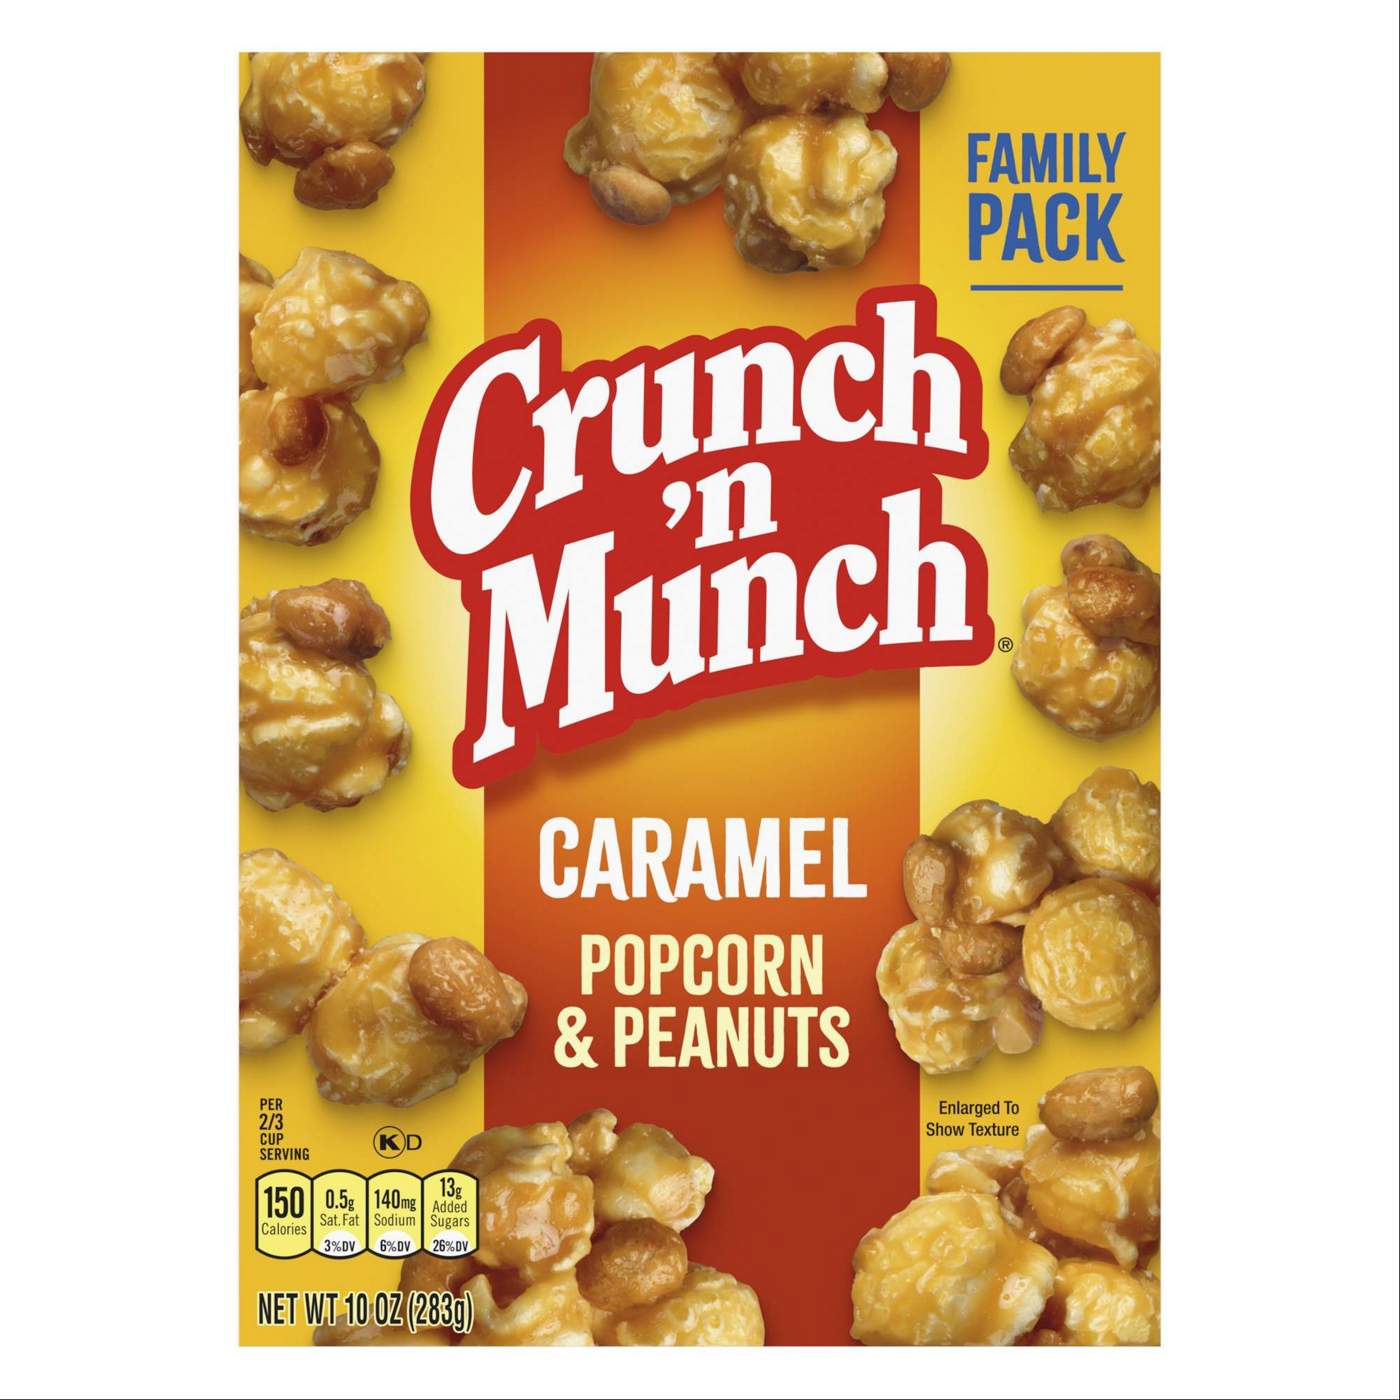 Crunch 'n Munch Caramel Popcorn with Peanuts; image 2 of 4